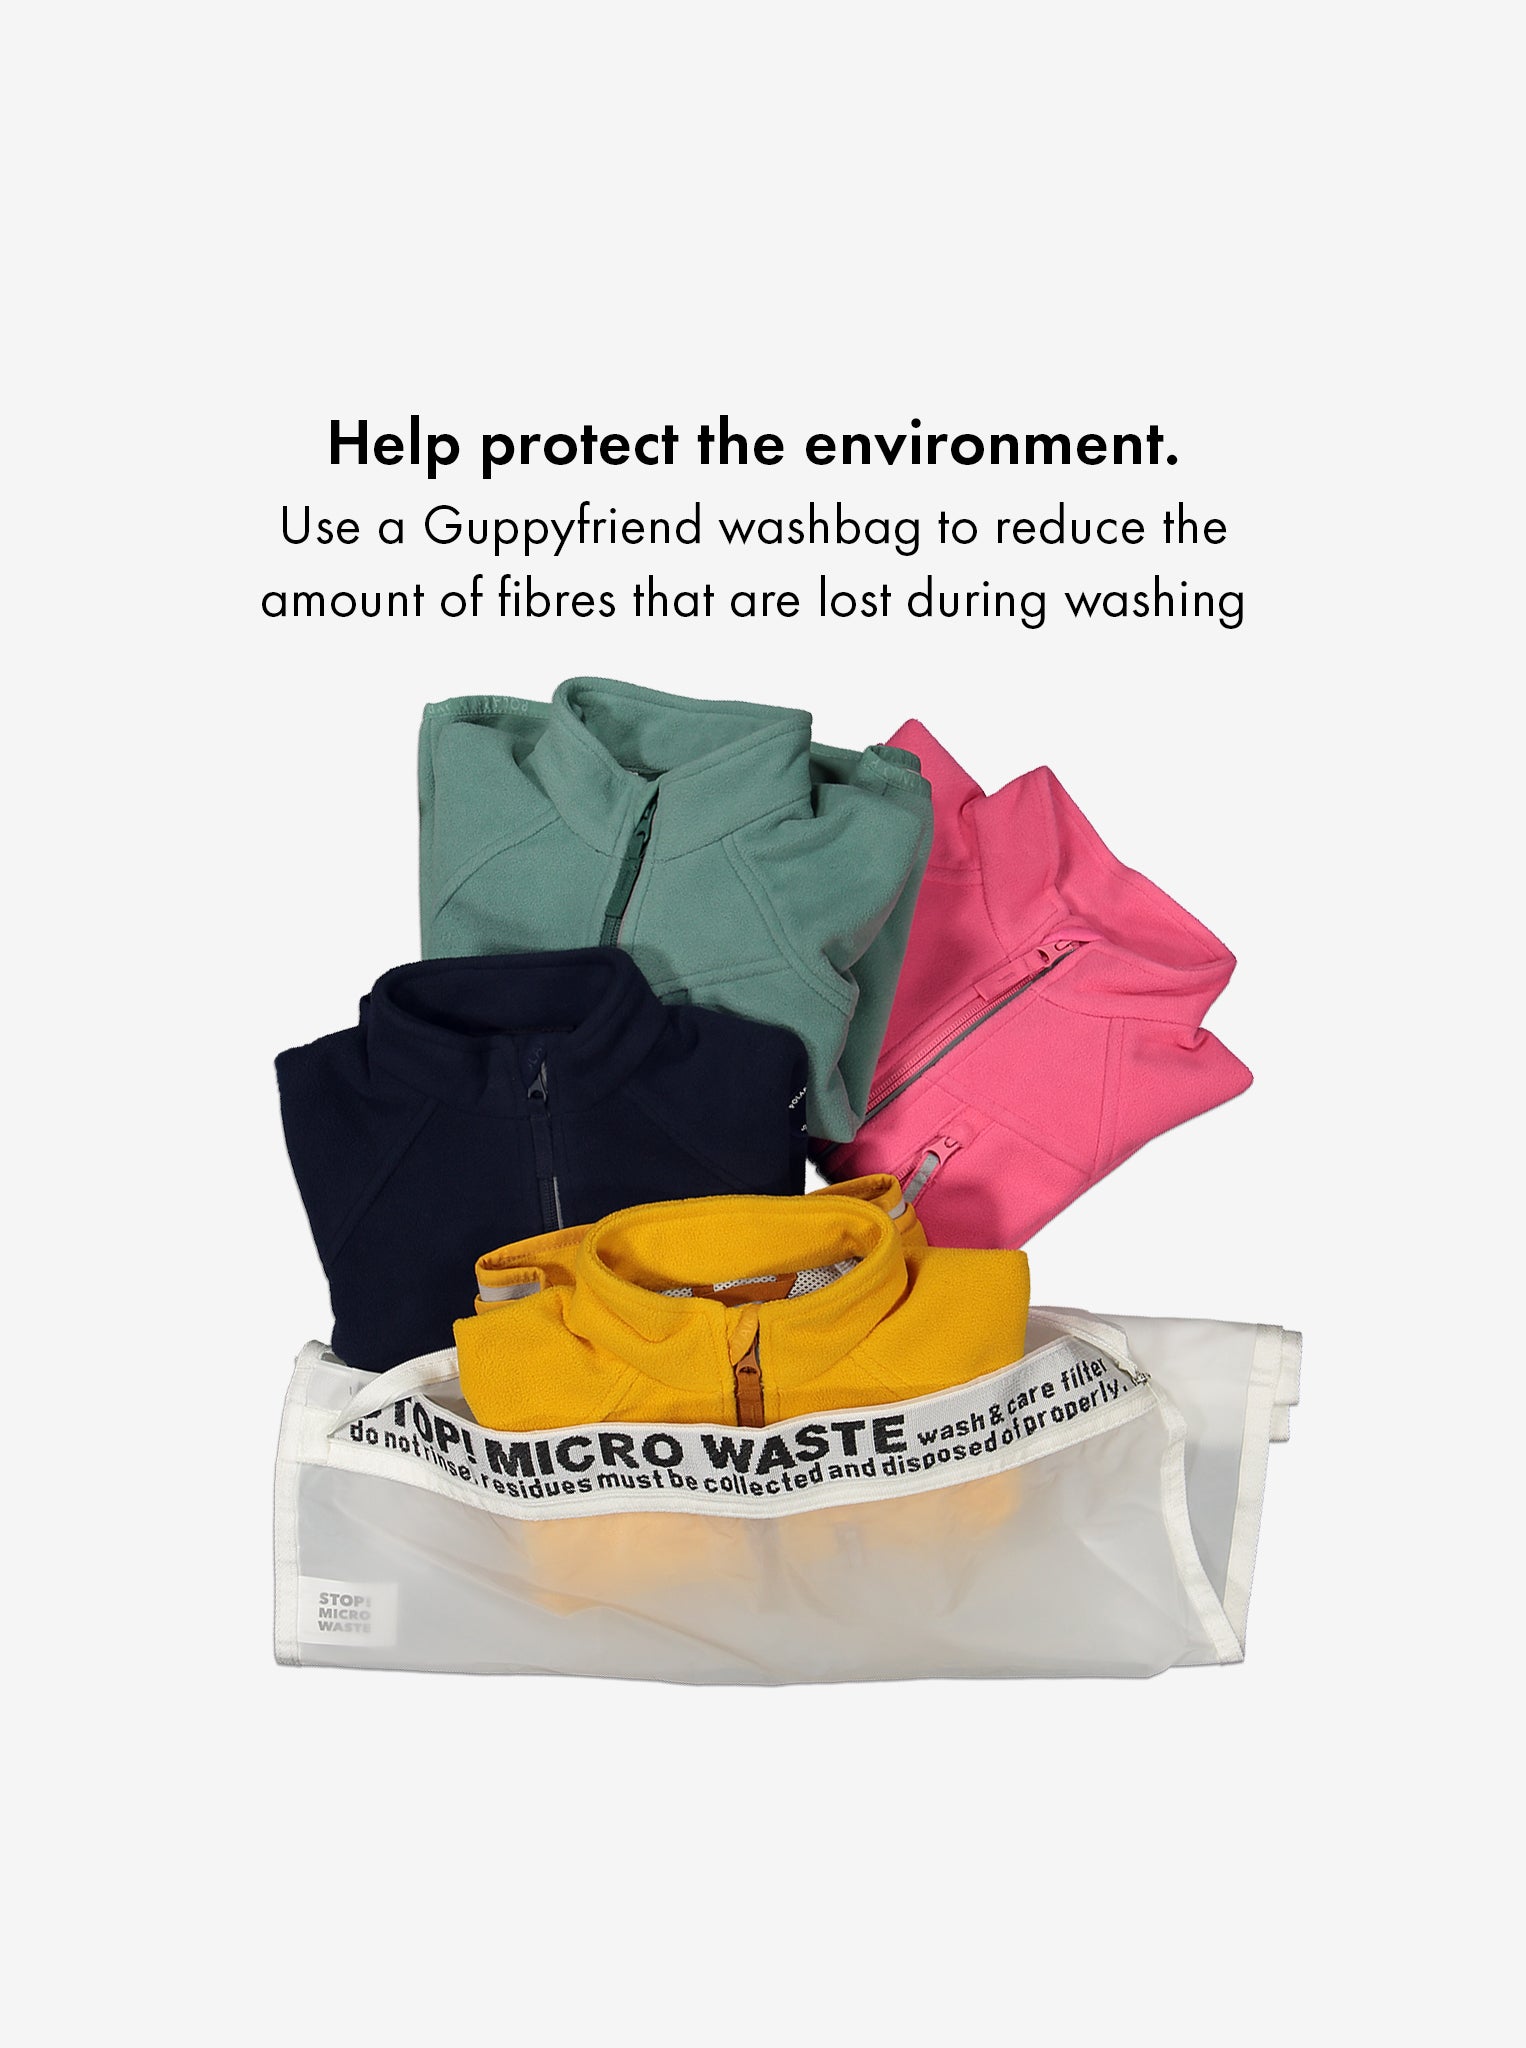 4 pieces of kids waterproof fleece jacket in green, pink, navy, and yellow placed in an eco-friendly Guppyfriend washbag.